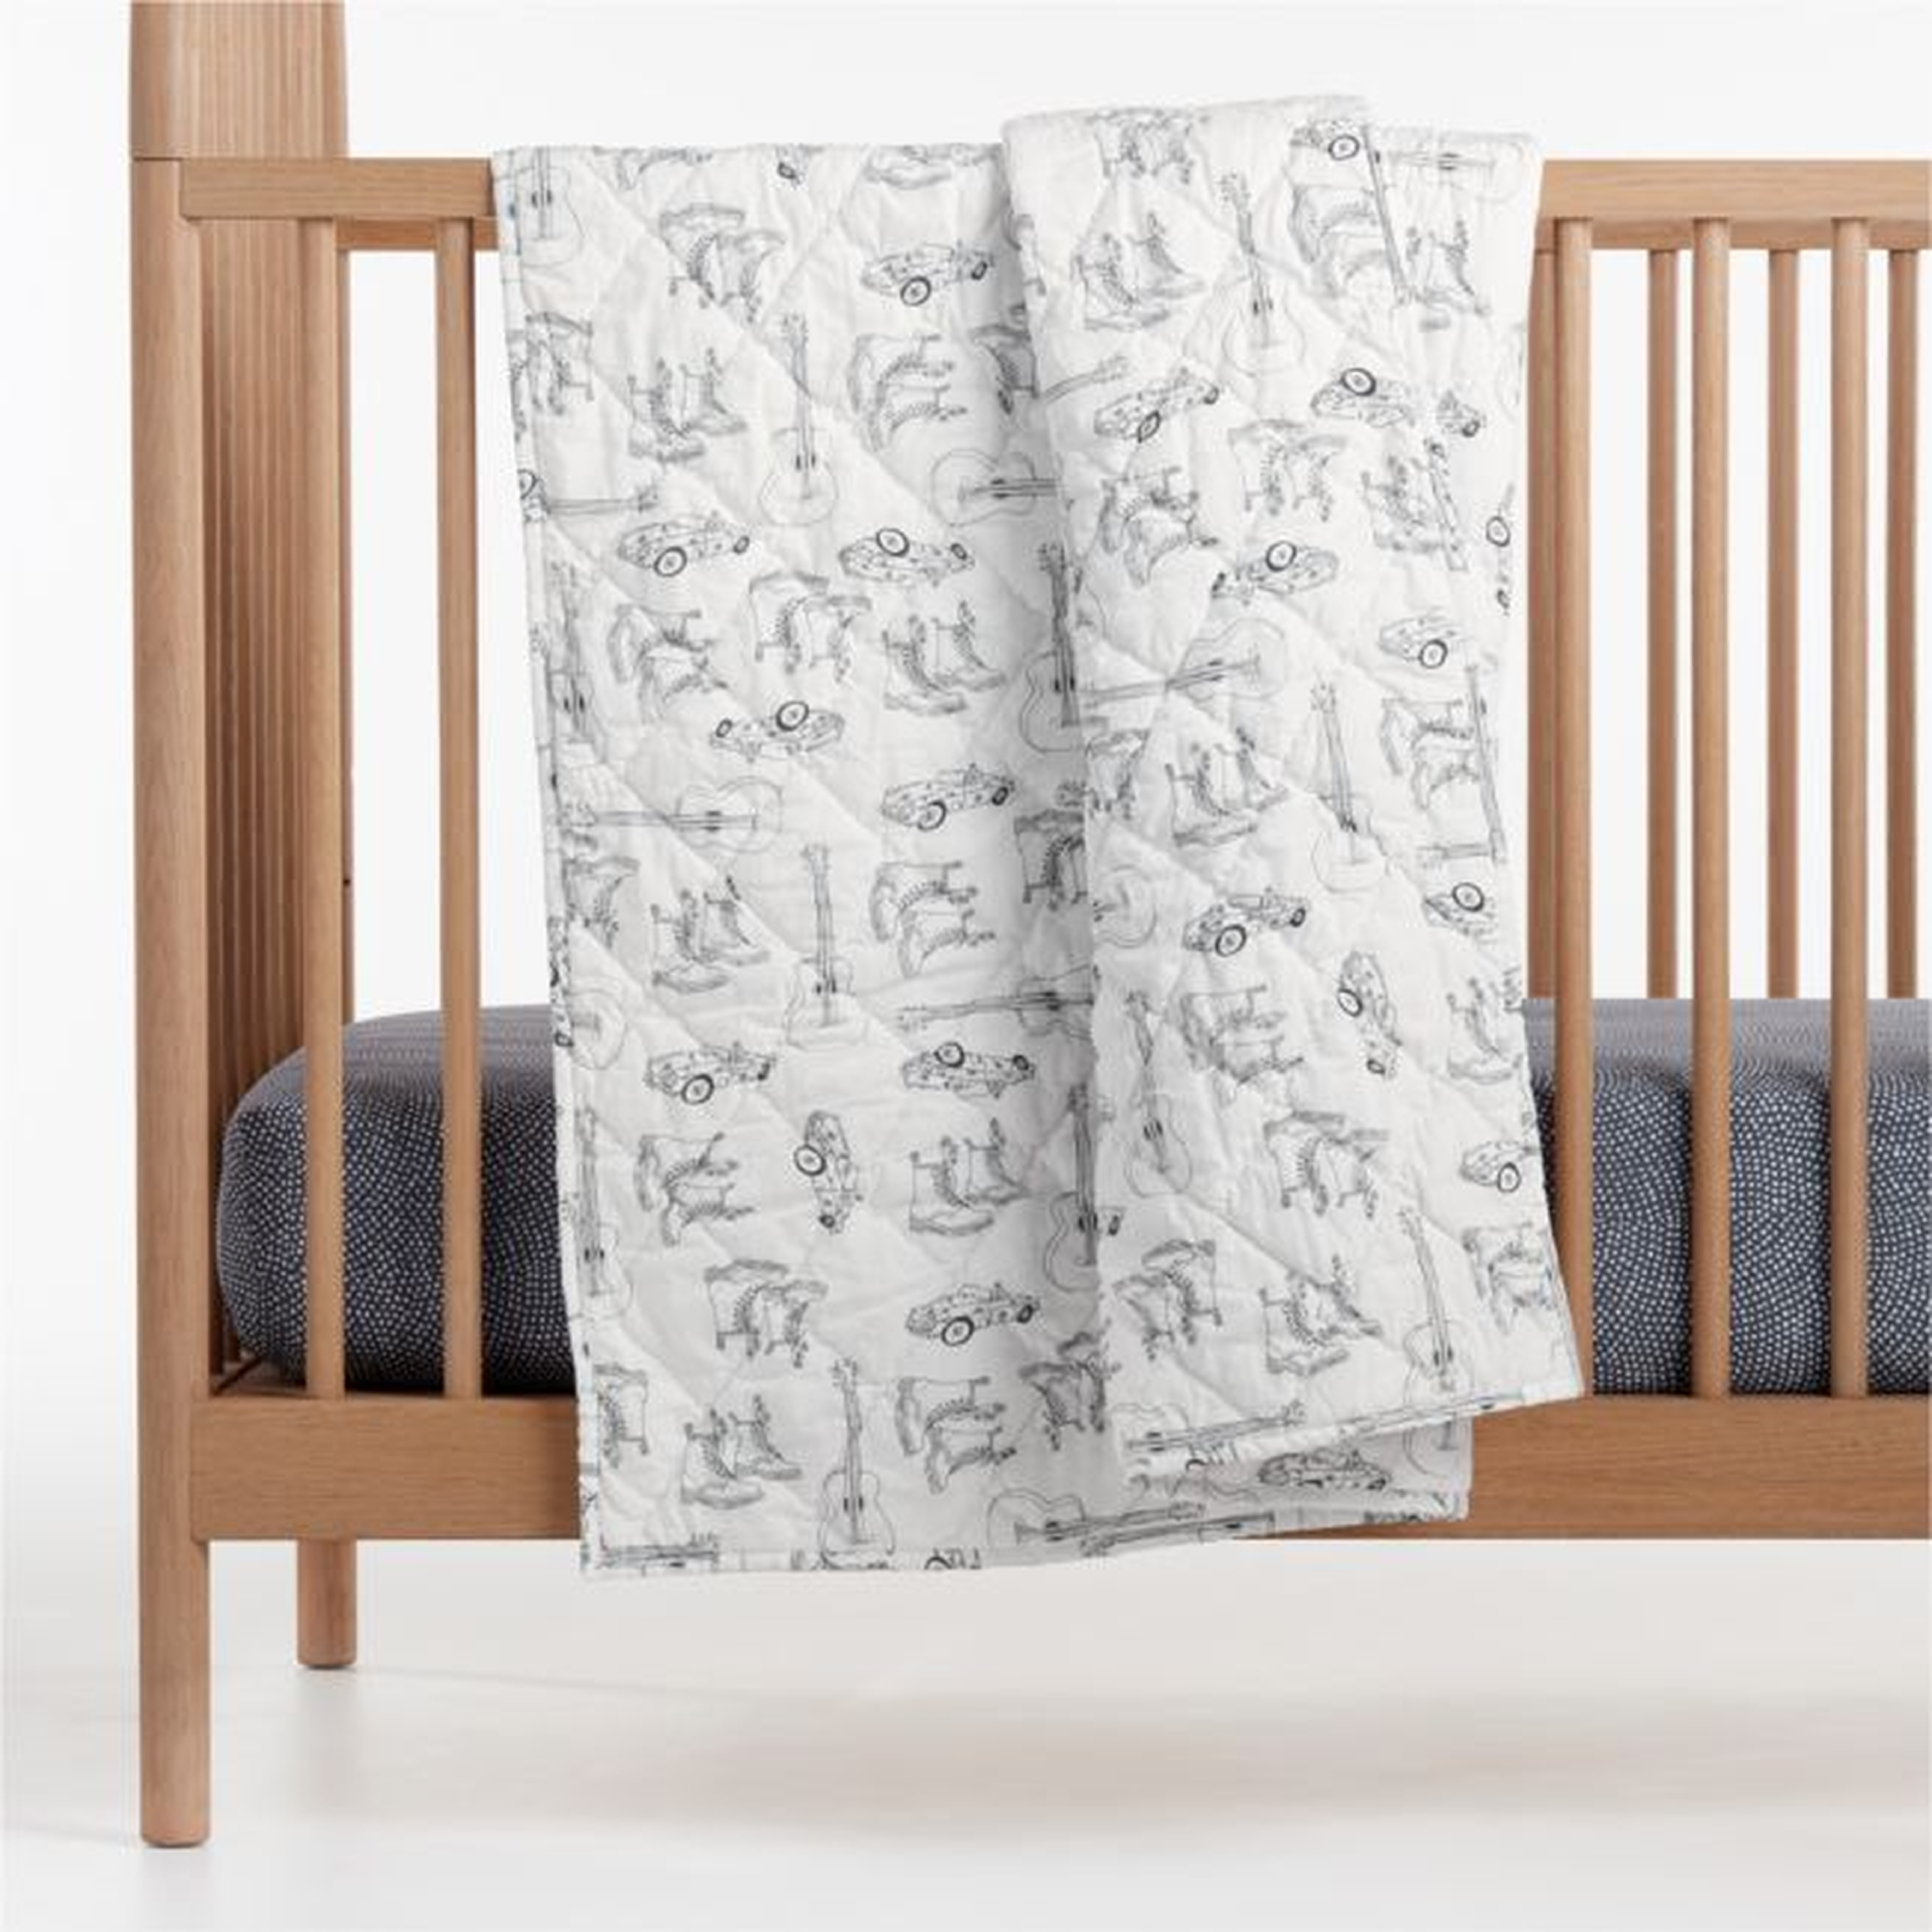 Lucca Indigo Baby Crib Quilt by Leanne Ford - Crate and Barrel